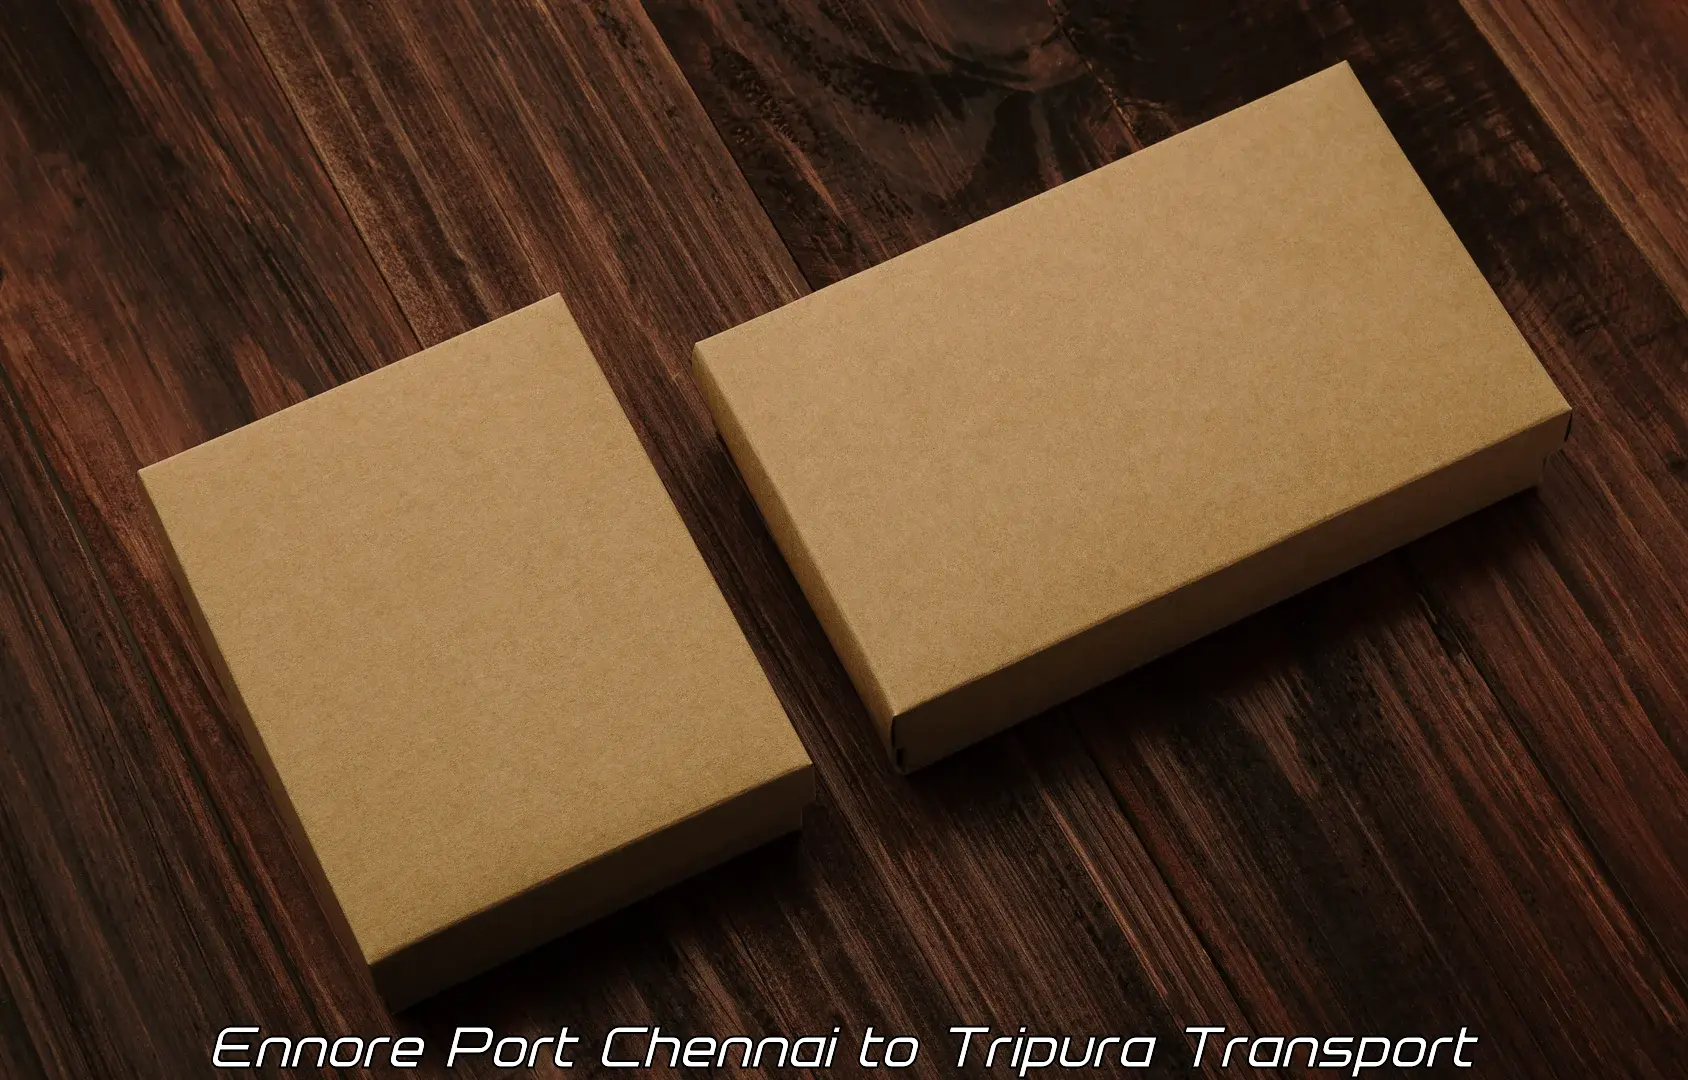 Transport bike from one state to another Ennore Port Chennai to Agartala